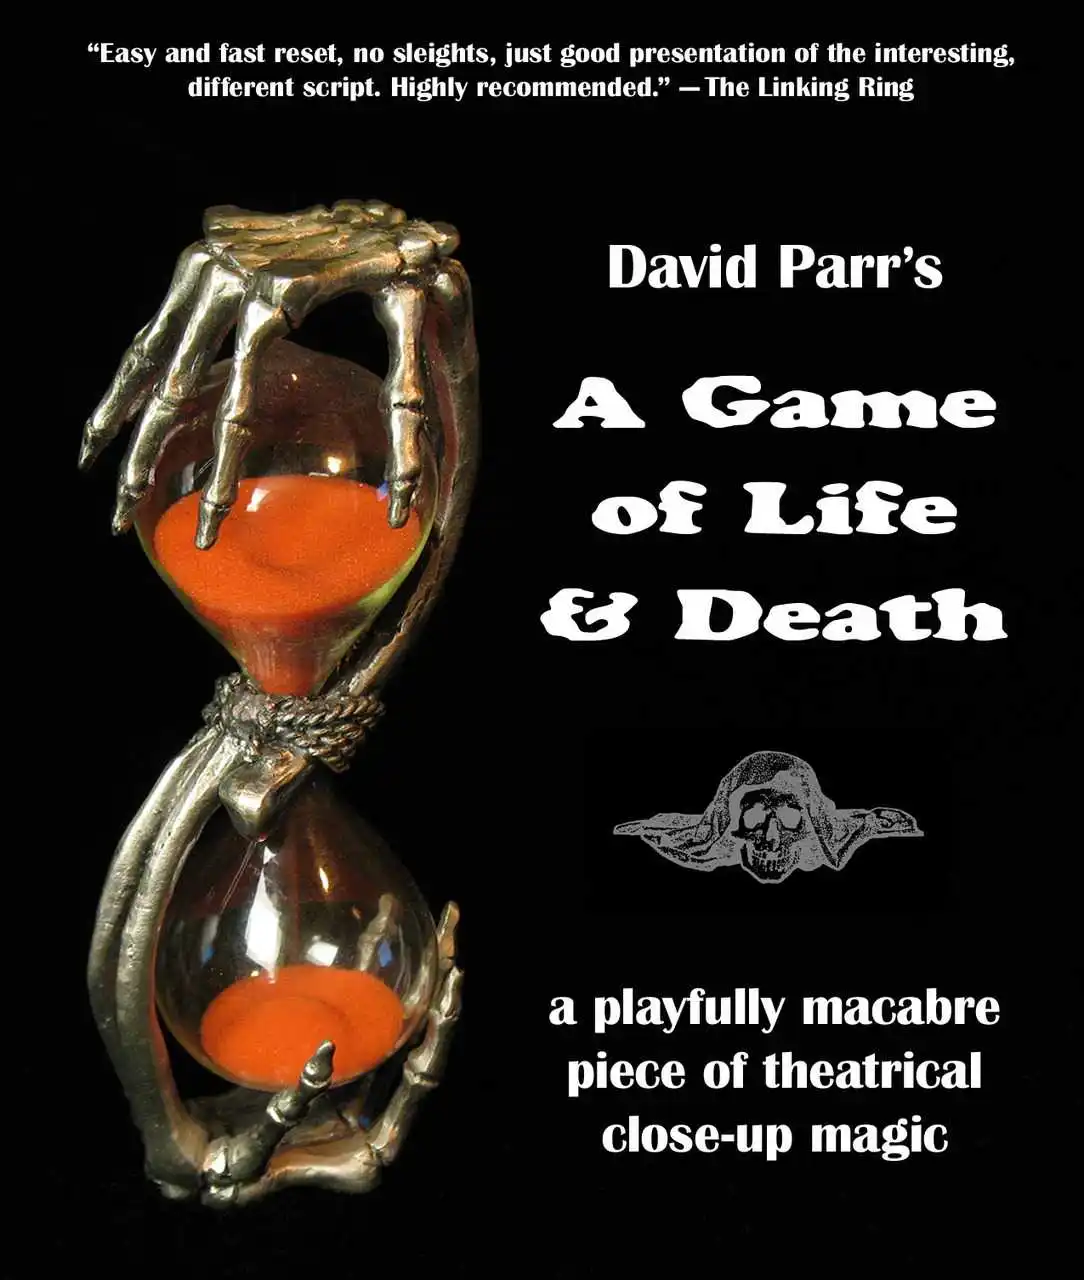 

A Game of Life & Death by David Parr, Magic tricks (Magic instruction)